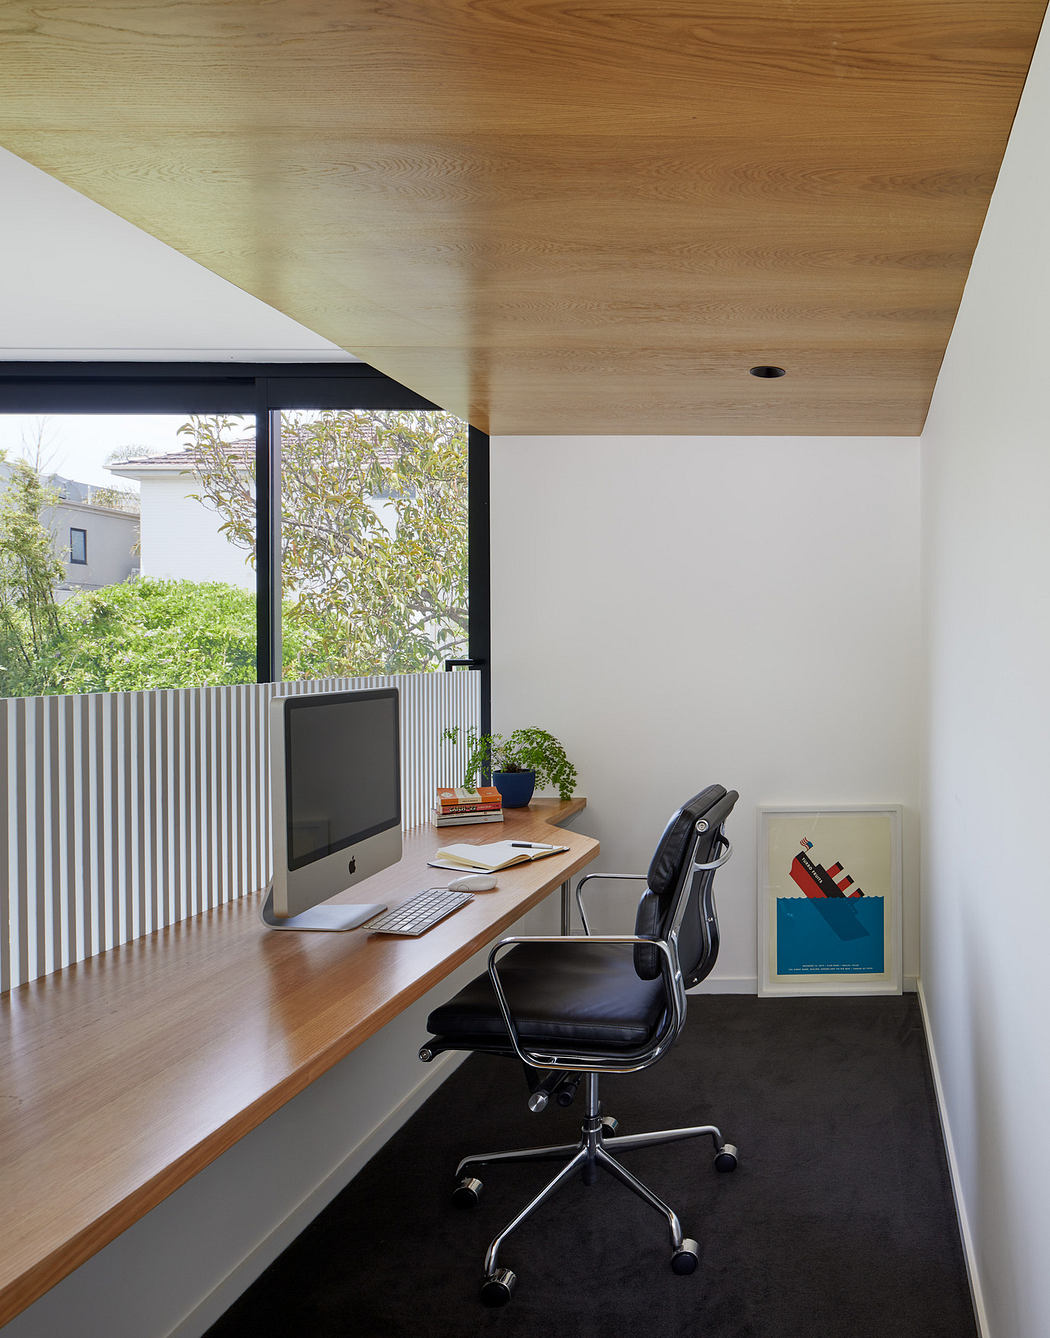 Modern home office with wooden desk, chair, and slatted window details.